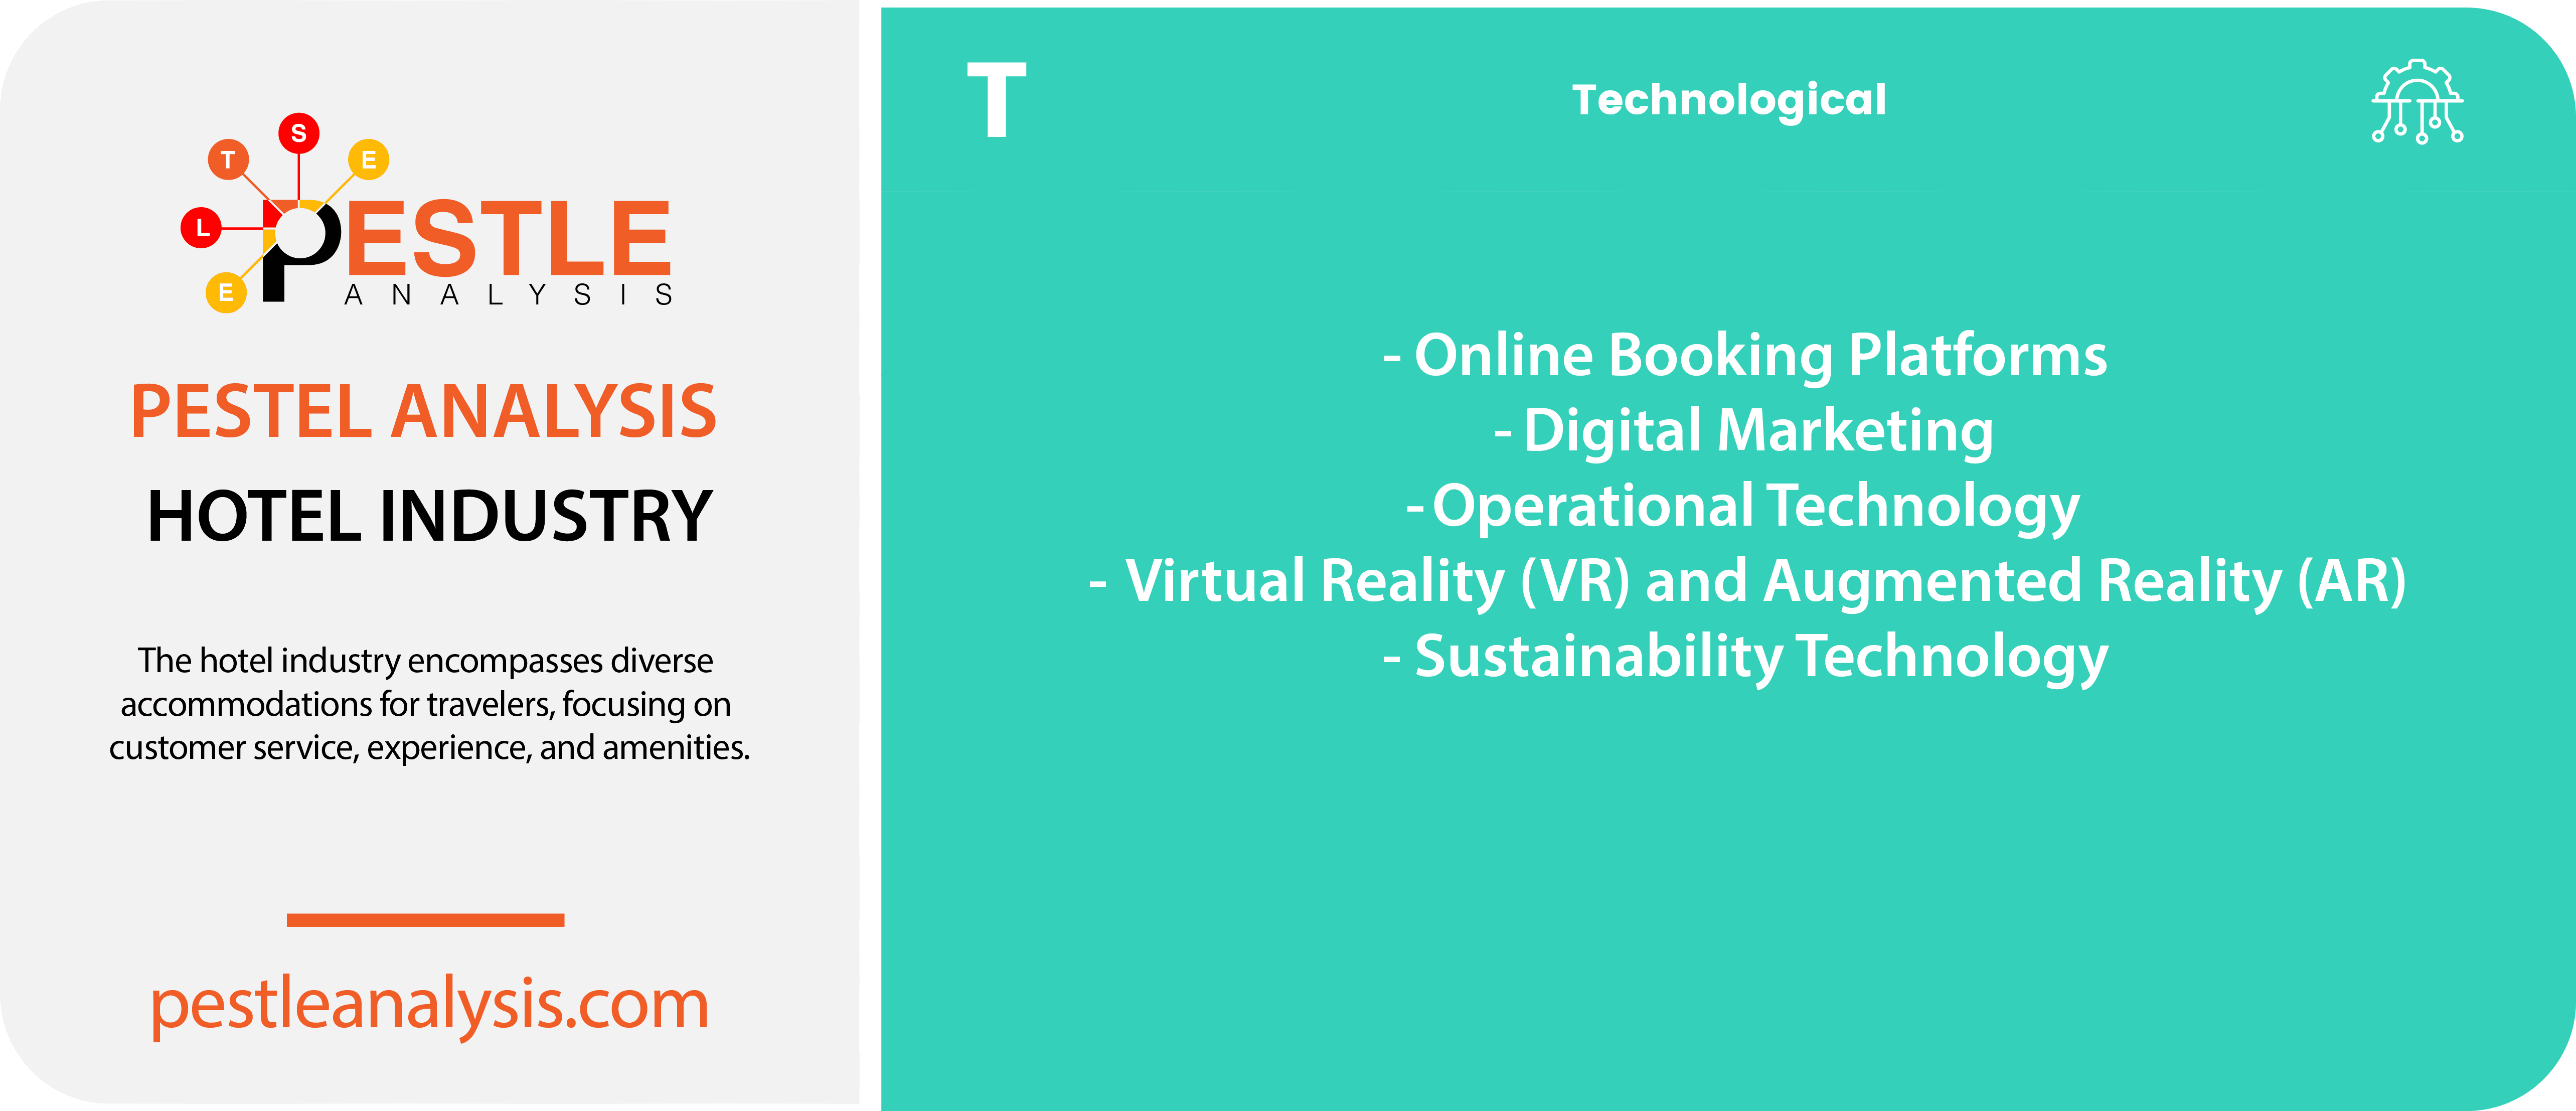 hotel-industry-pestle-analysis-technological-factors-template